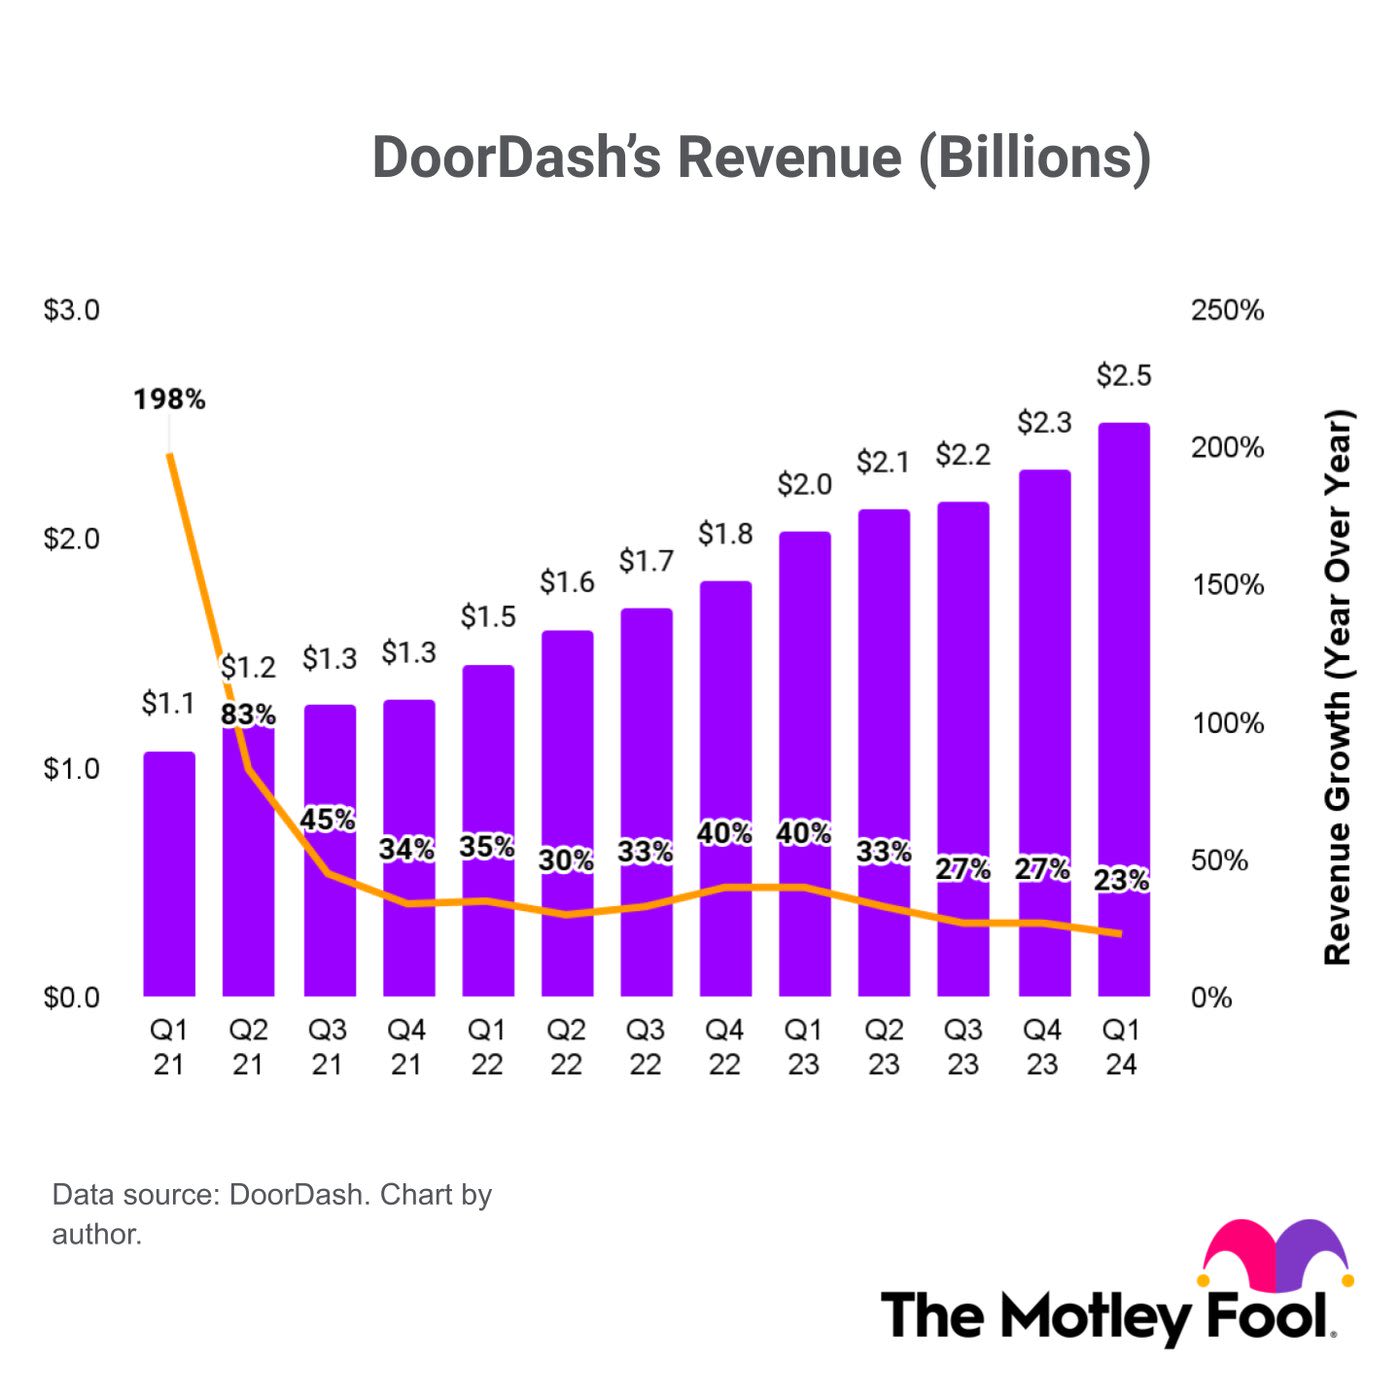 DoorDash Delivered More Than Food and Groceries in the Latest Quarter, but Here's Why Its Stock Sank